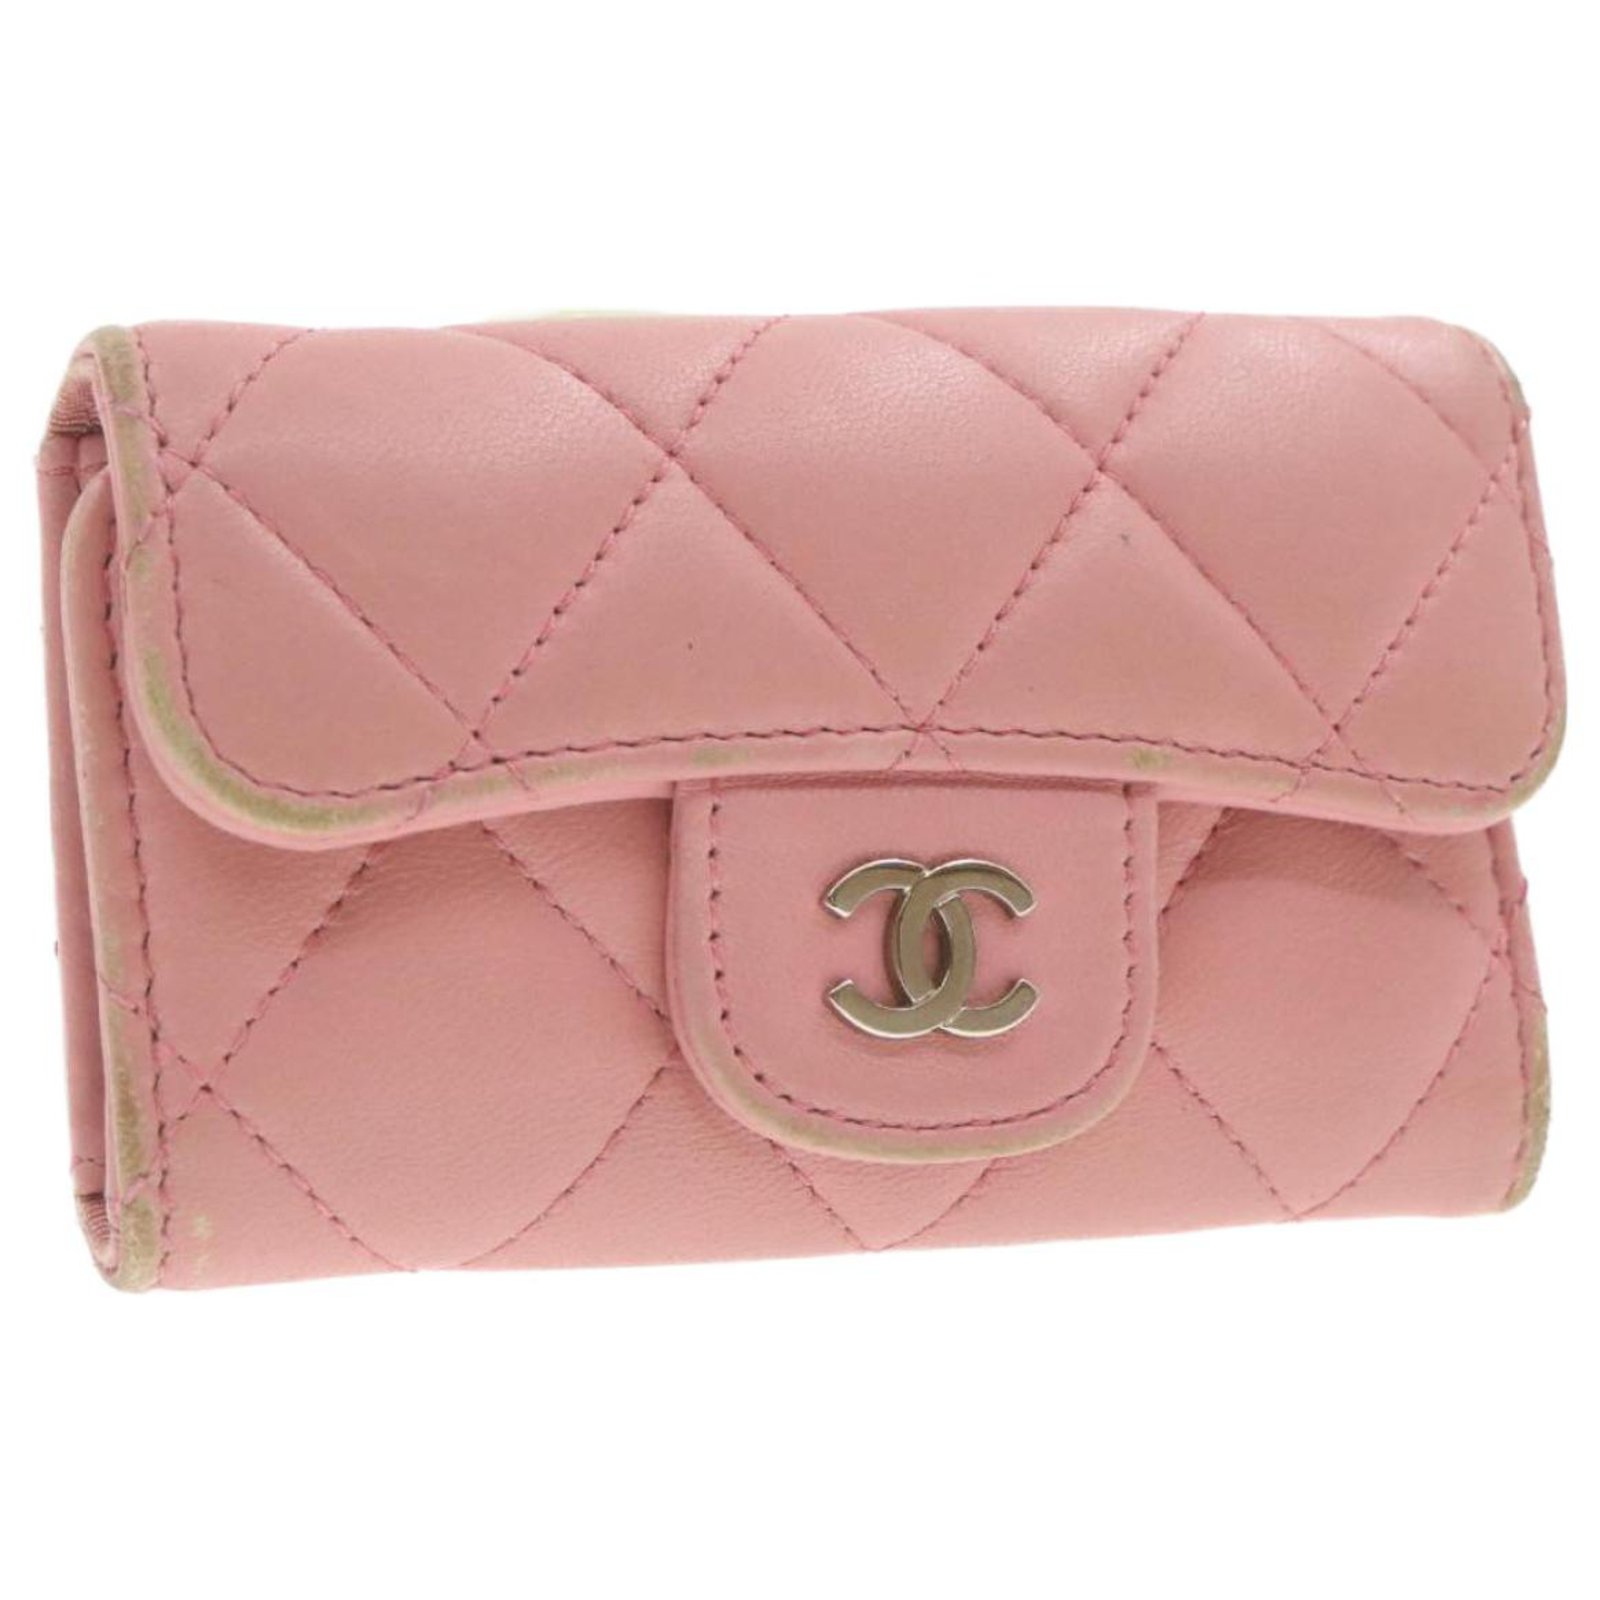 Timeless/classique leather clutch bag Chanel Pink in Leather